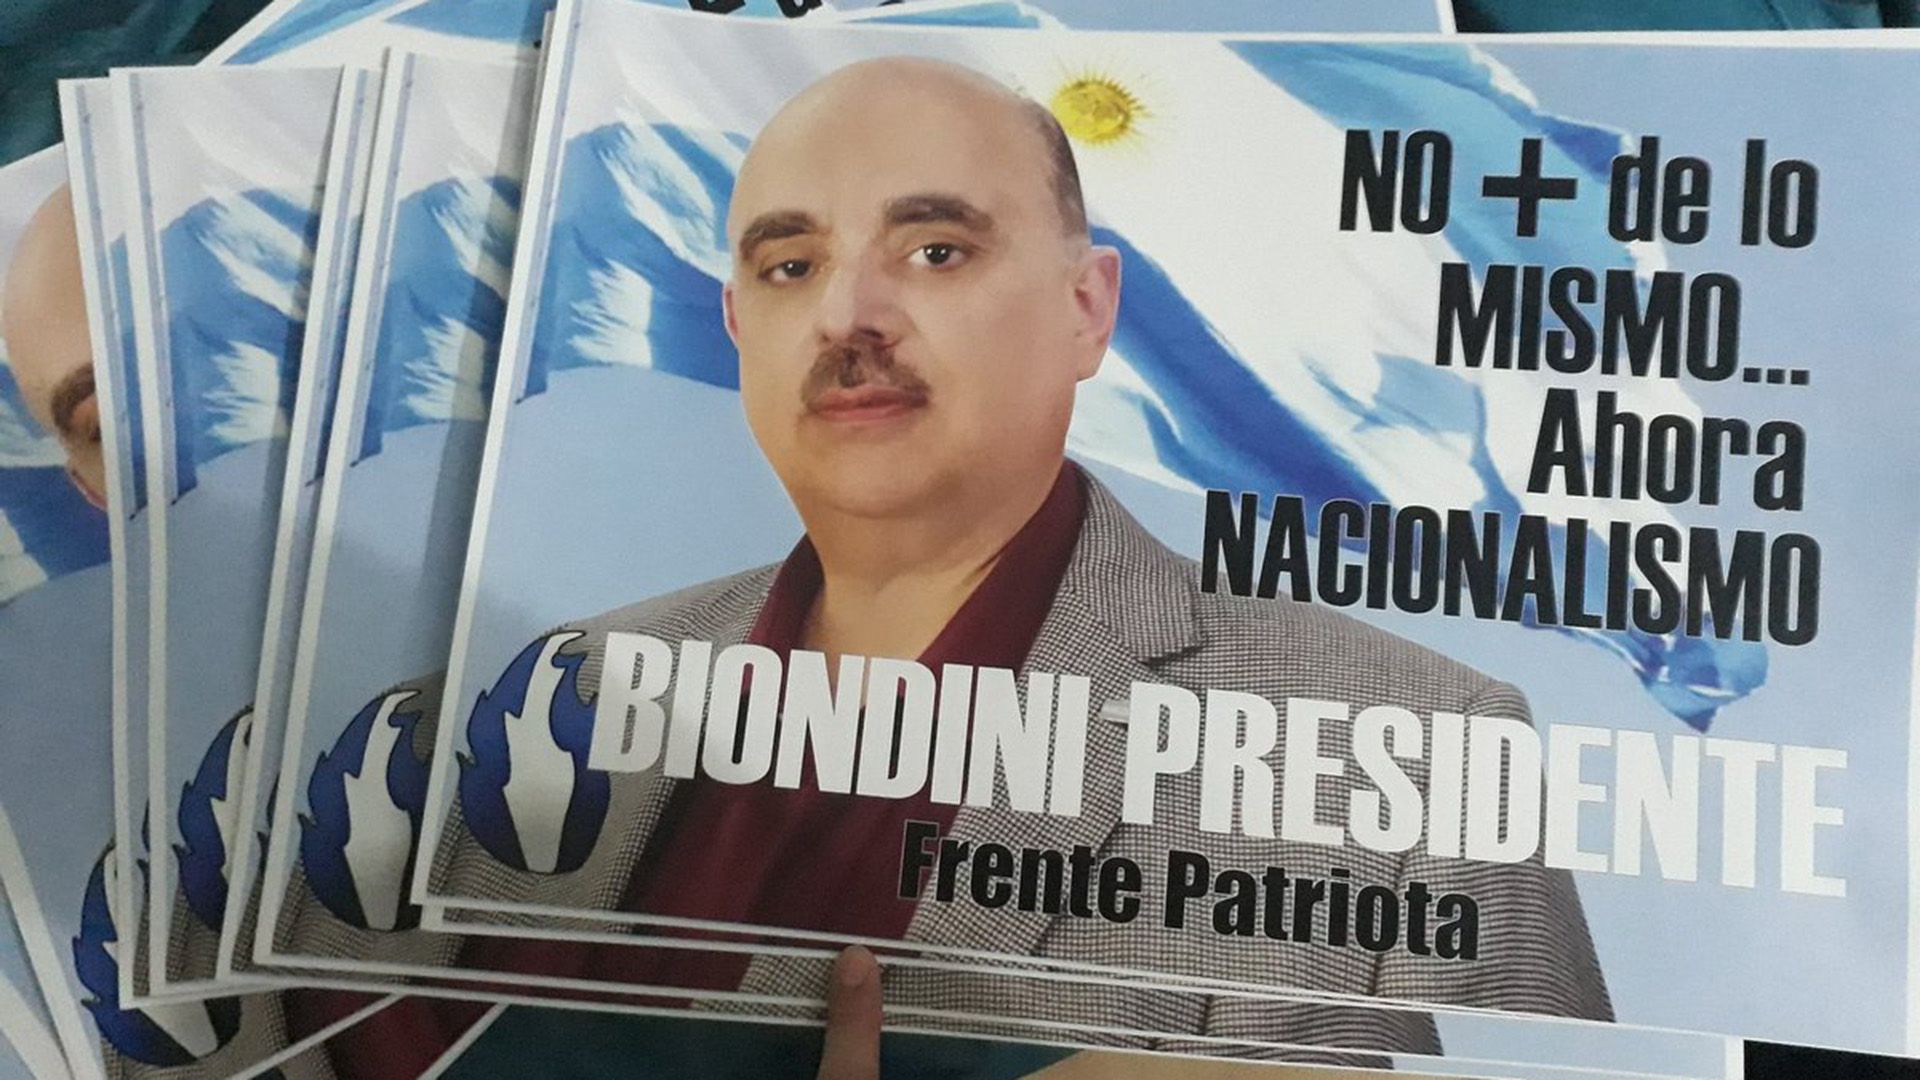 Biondini ran for president for the Patriot Front in 2019